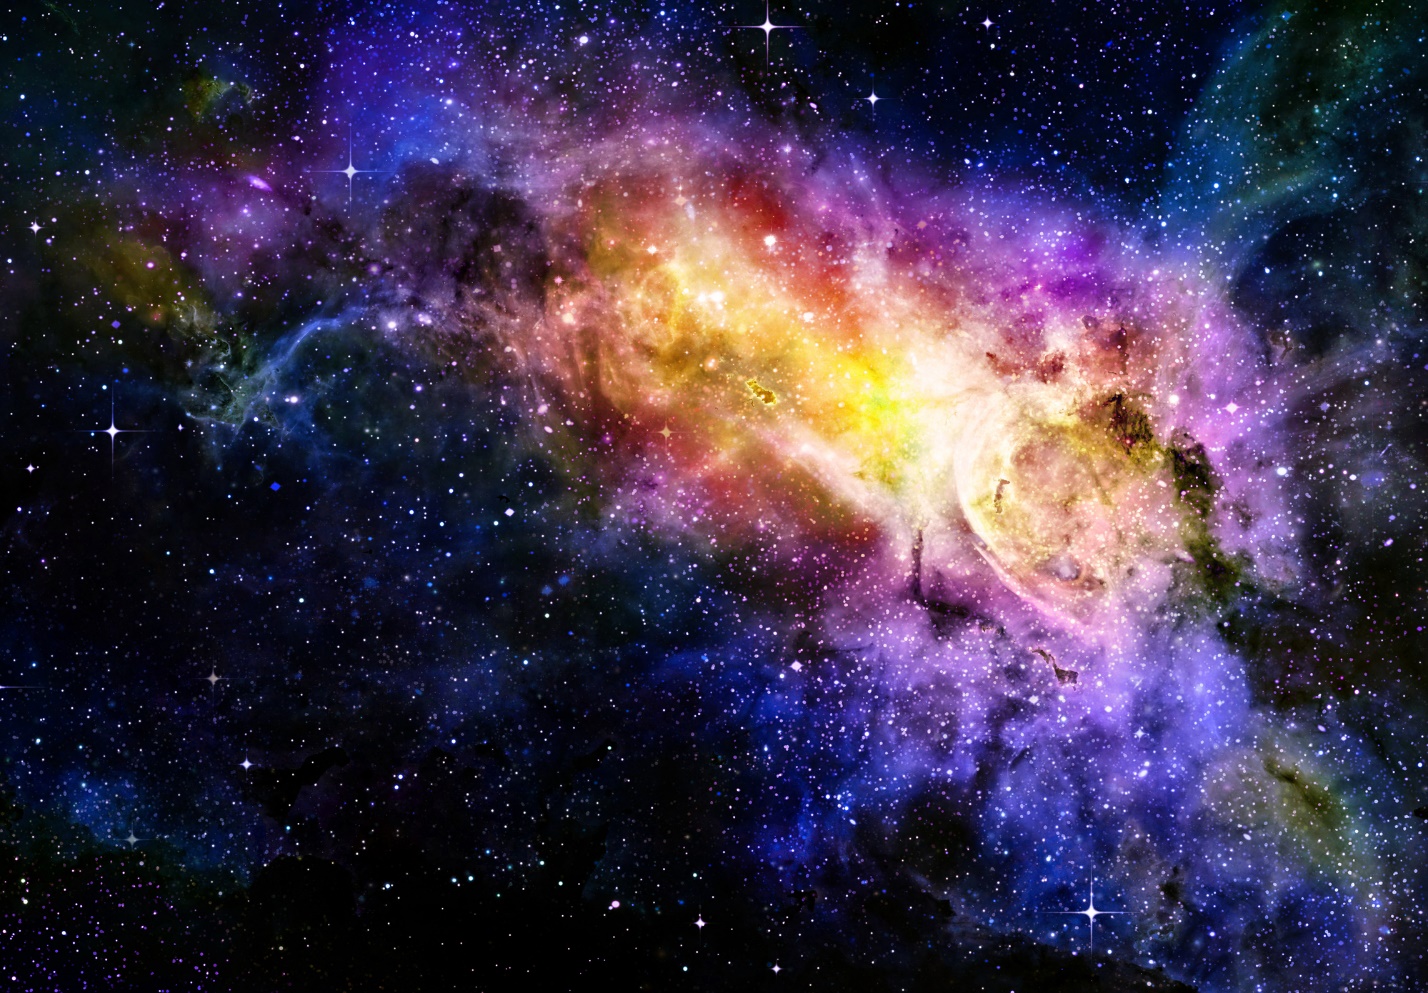 A colorful galaxy in space

Description automatically generated